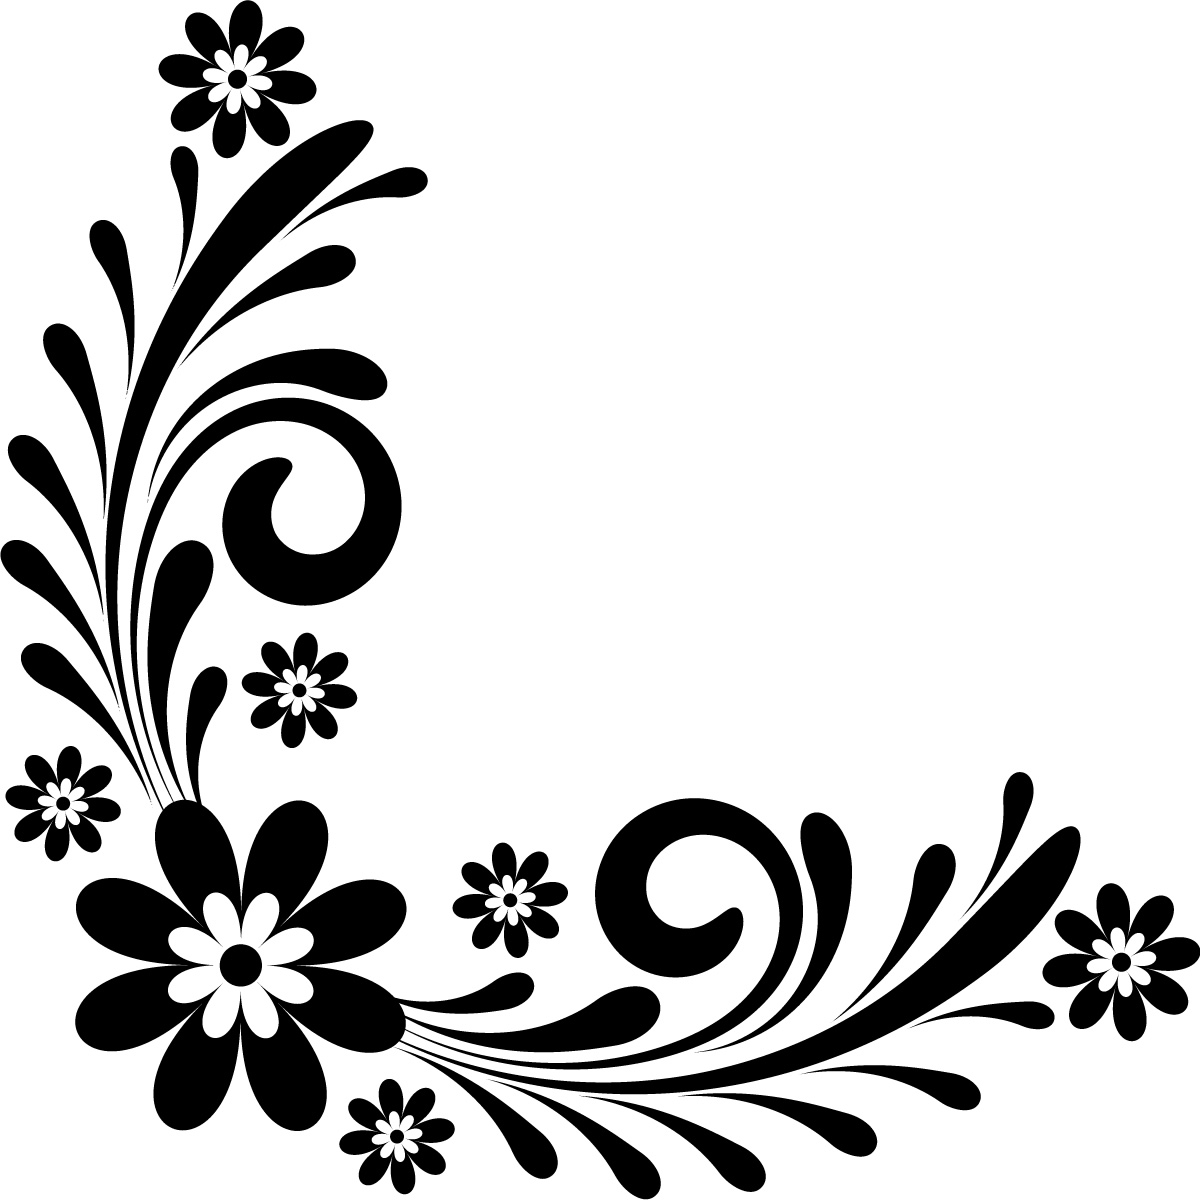 Free Page Border Designs Flowers Black And White, Download.